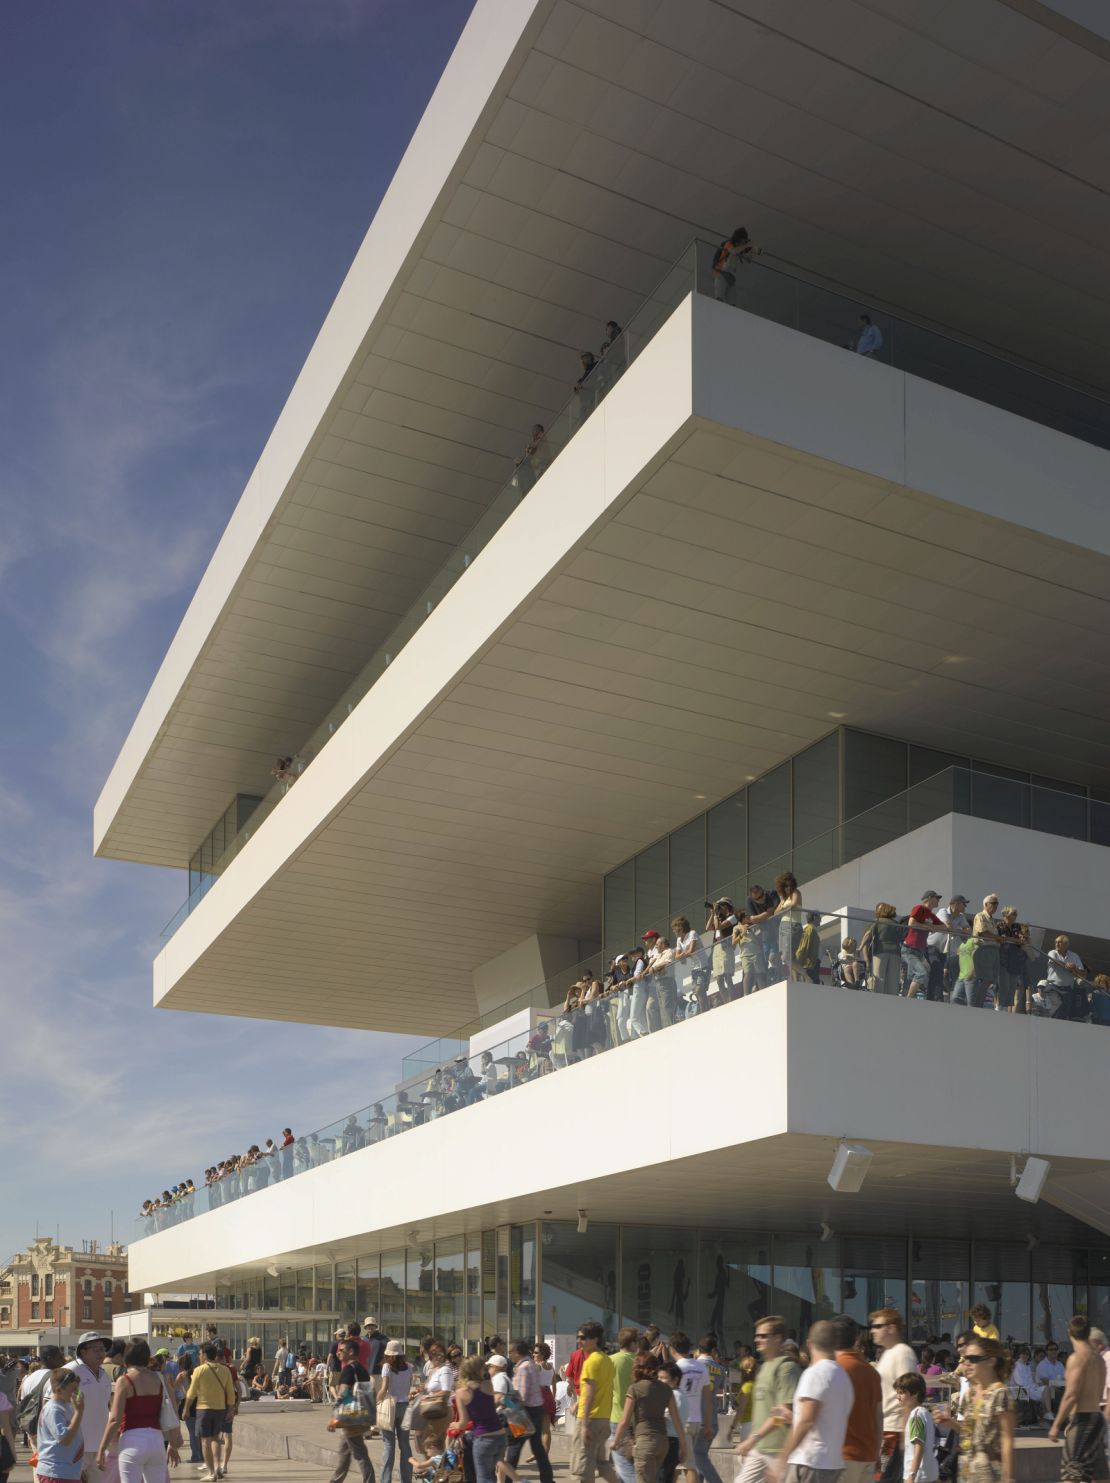 The America's Cup Building in Valencia, Spain, was completed in just 11 months to host the first America's Cup in Europe in over 150 years. 